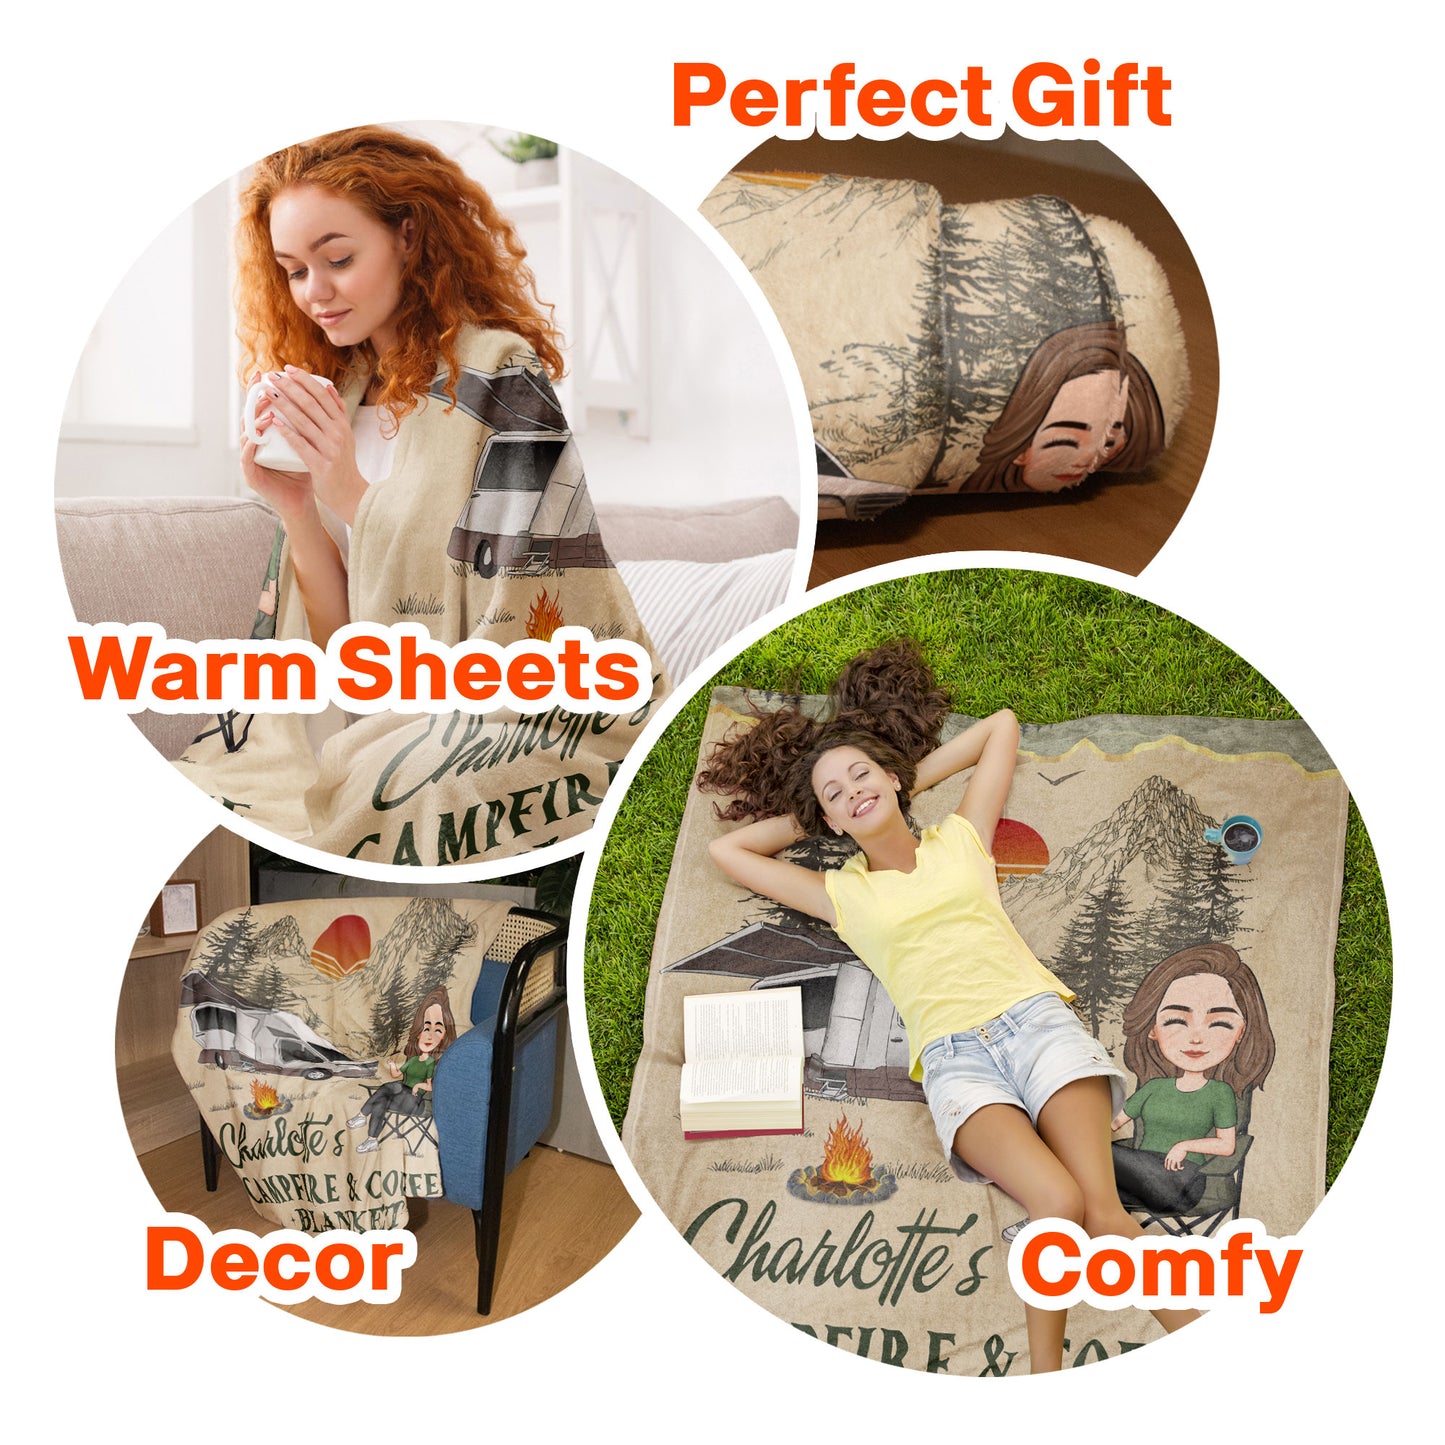 My Campfire And Coffee Blanket - Personalized Blanket